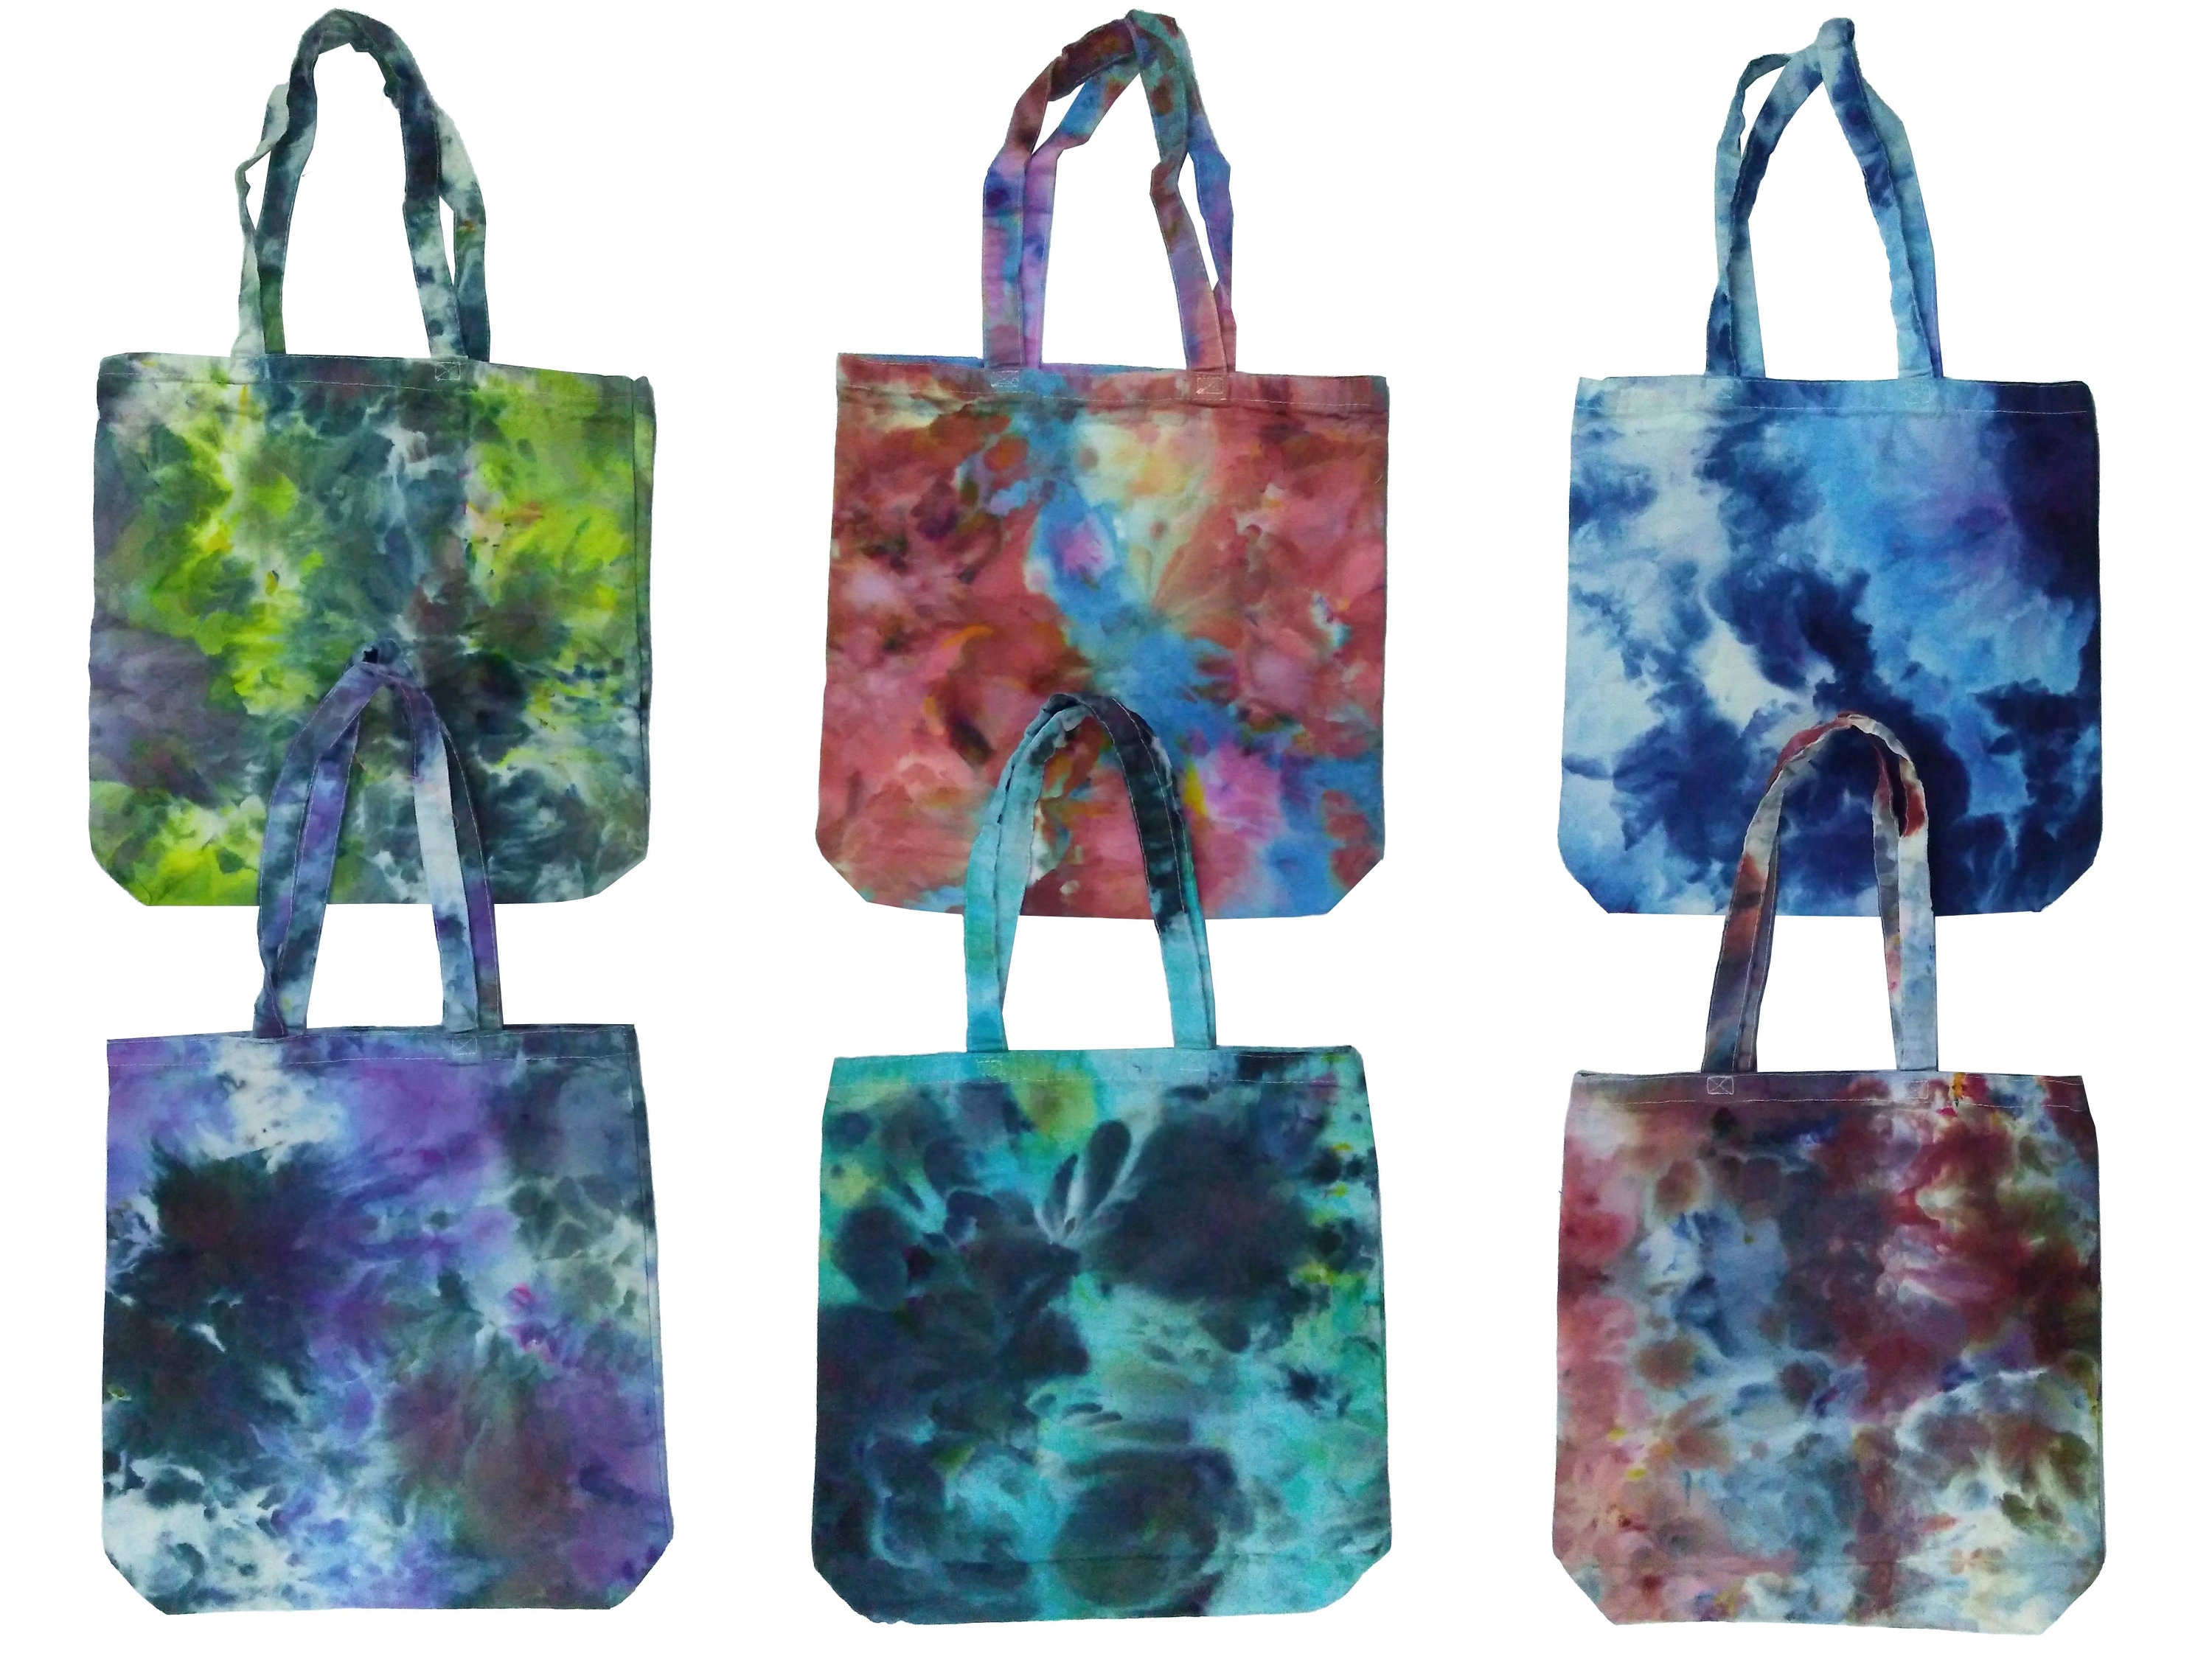 Fashion Pastel Pink Tote Bags Tie Dye Totes Comes With Shoulder Straps Work  Purse For Ladies From Posh_crochetarts, $46.12